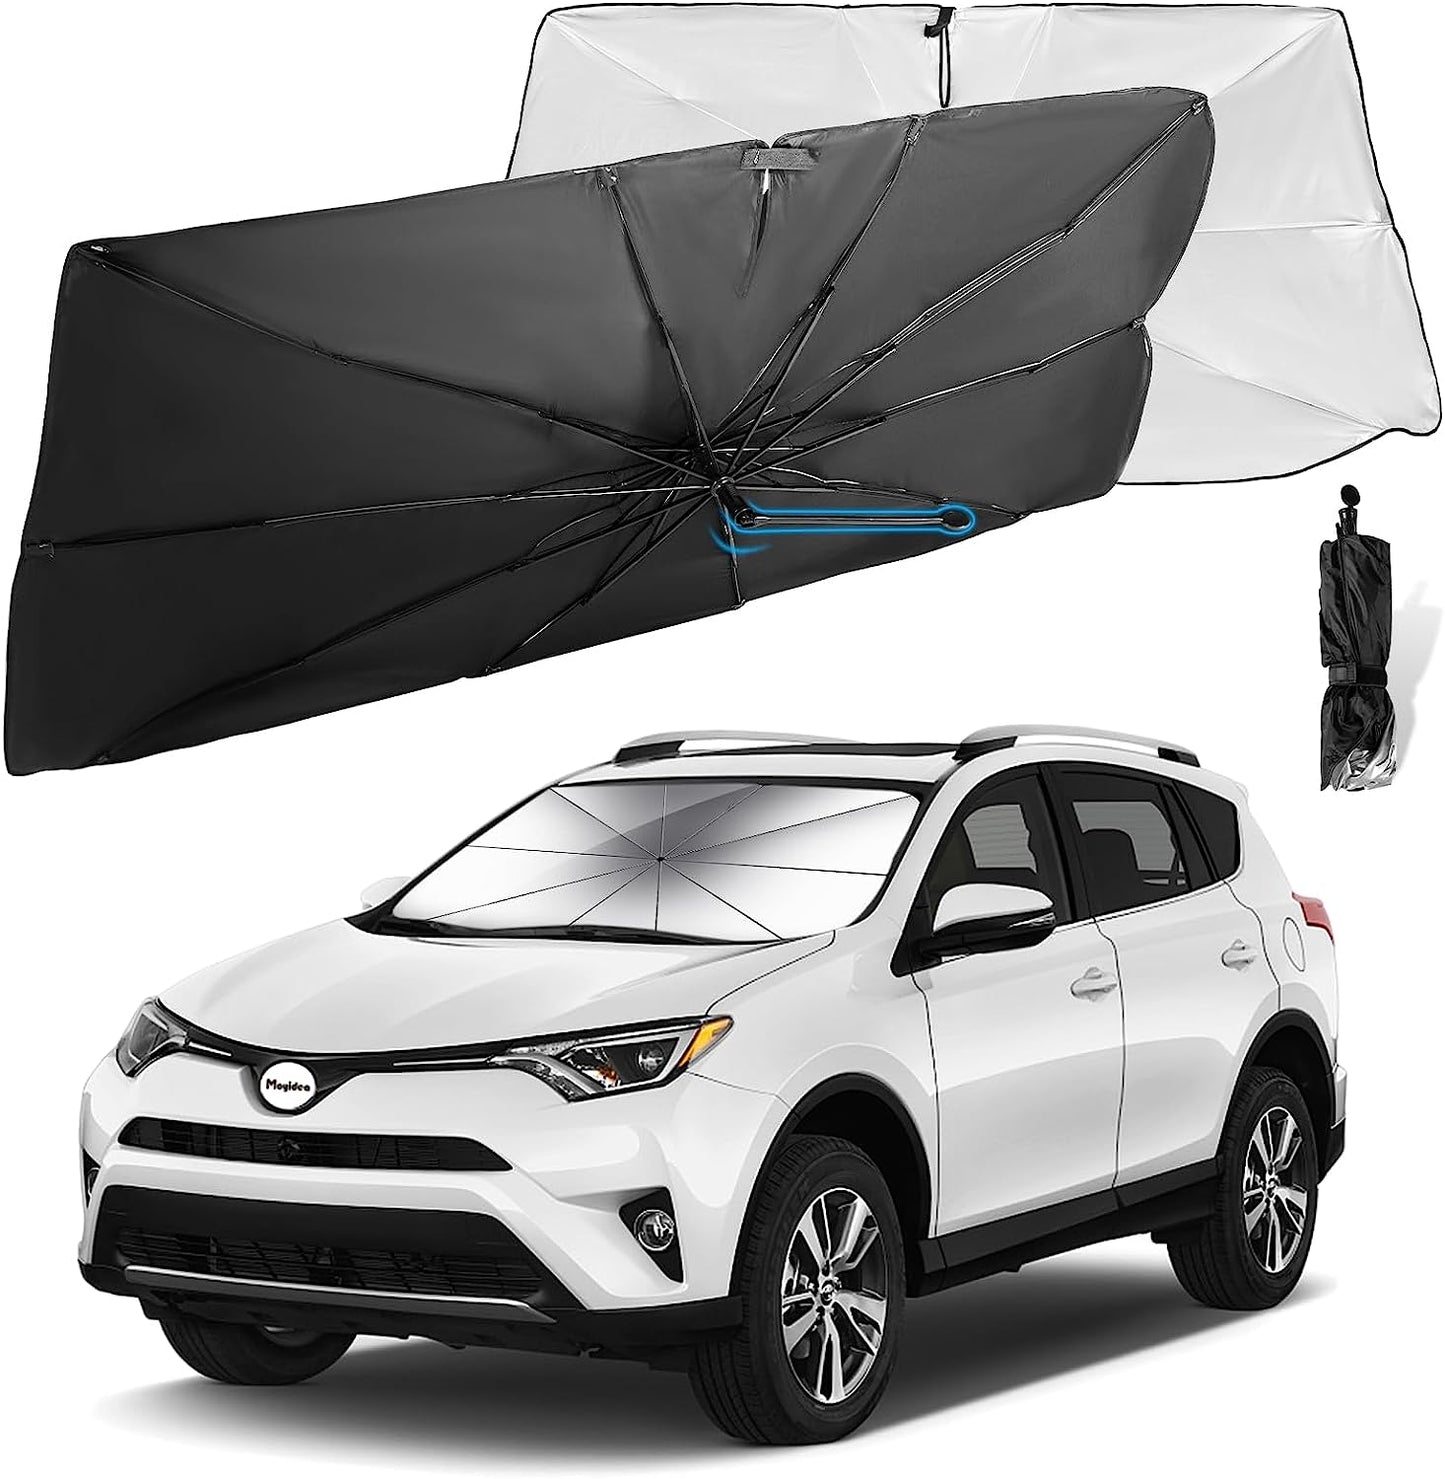 THE Moyidea Car Windshield Sun Shade - Foldable Umbrella Reflective Sunshade for Car Front Window Block UV Rays and Heat Car Visor Keep Vehicle Cool Cover Most Cars, SUV, Truck for Auto Windshield